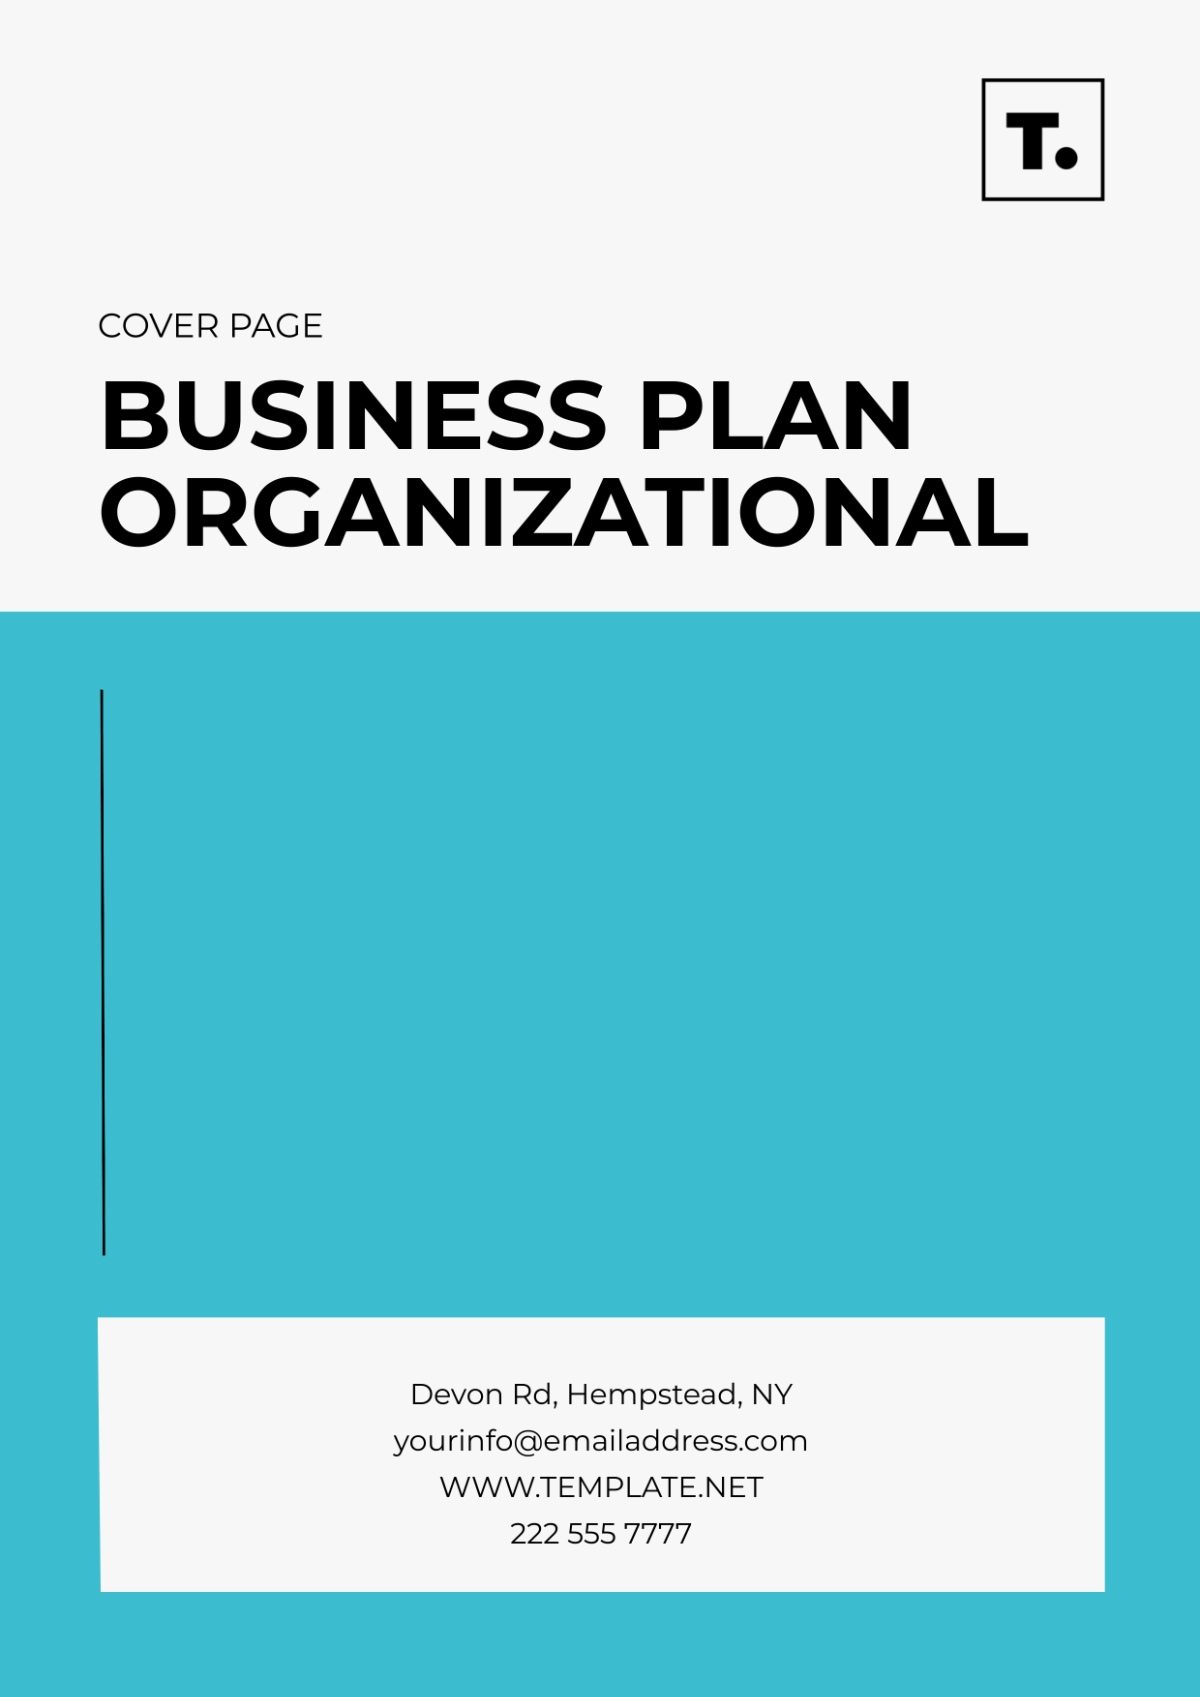 Business Plan Organizational Cover Page